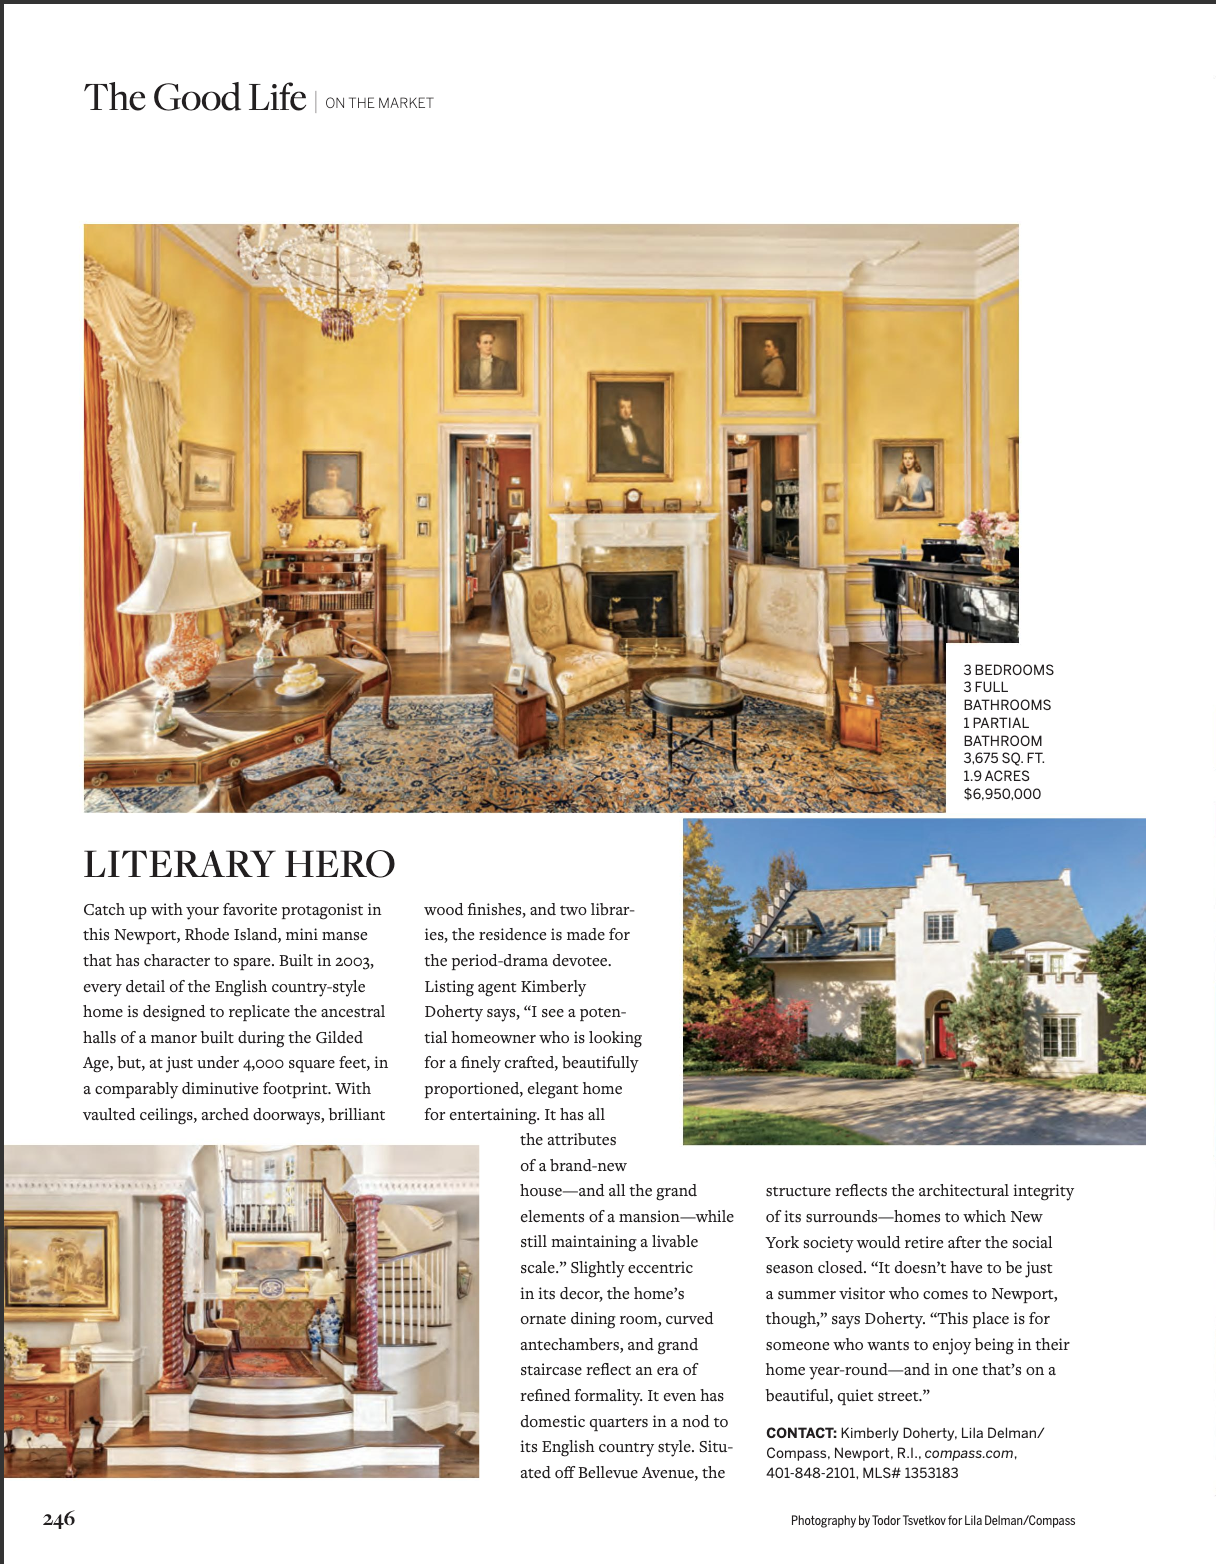 New England Home Magazine May/June Issue